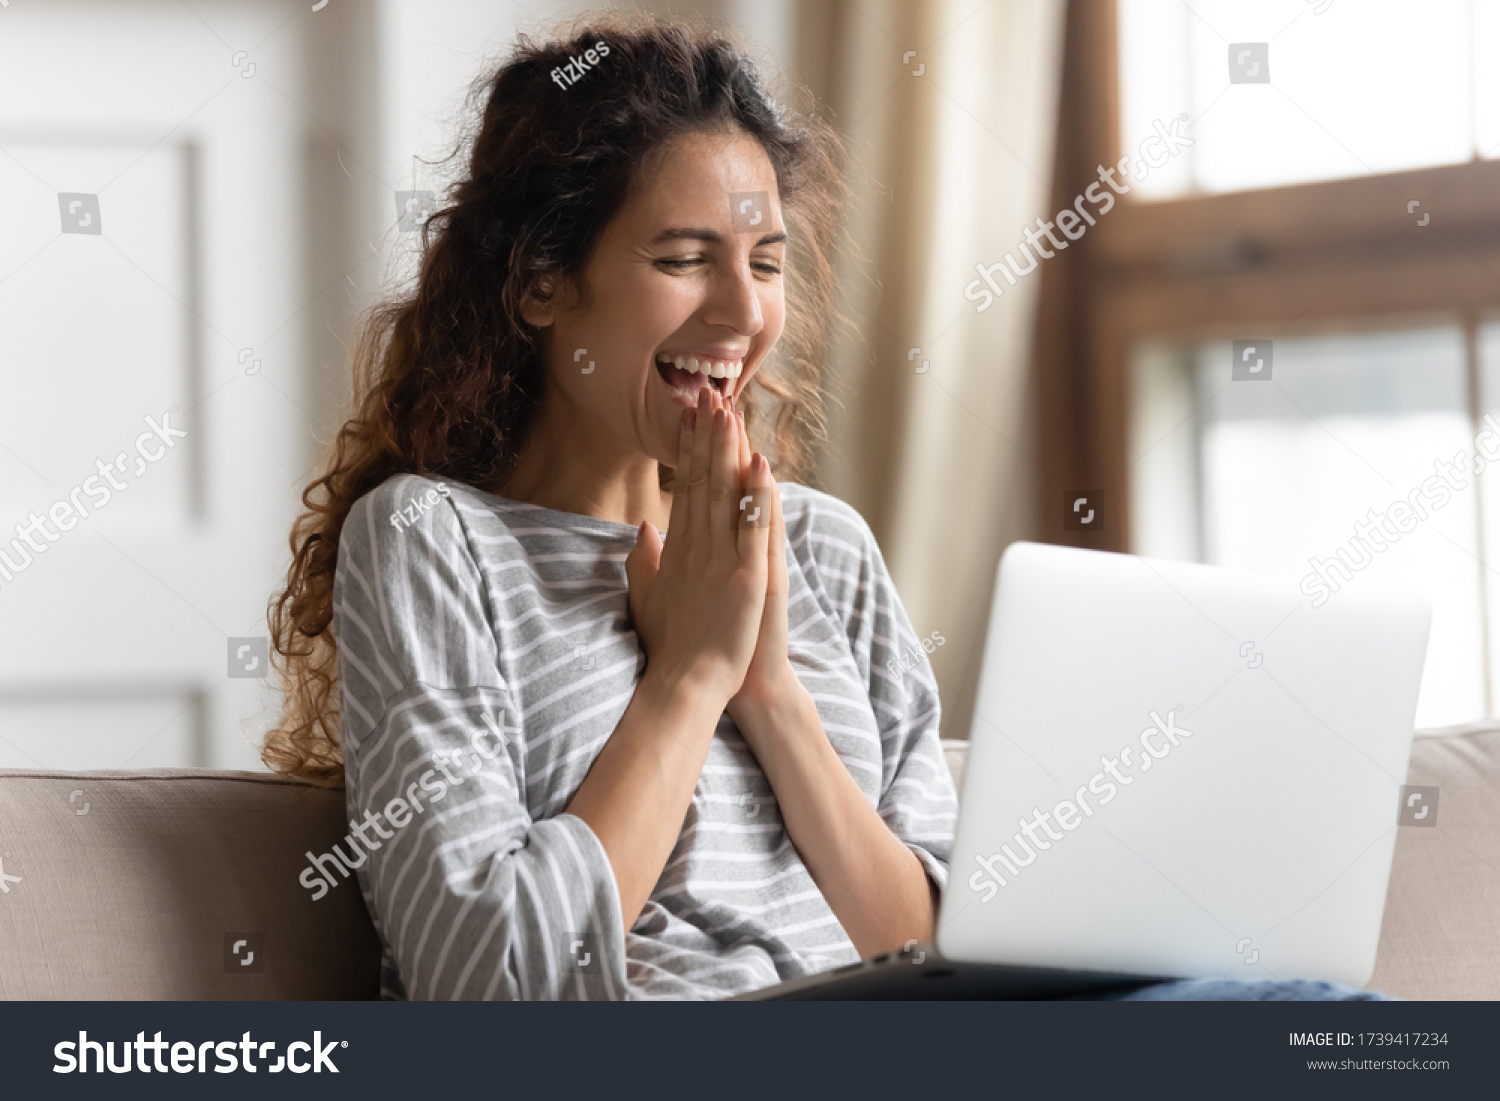 Excited woman looking at laptop screen, rejoicing good news, happy laughing girl reading email or message in social network, win online lottery, great shopping offer, sitting on cozy sofa at home #1739417234